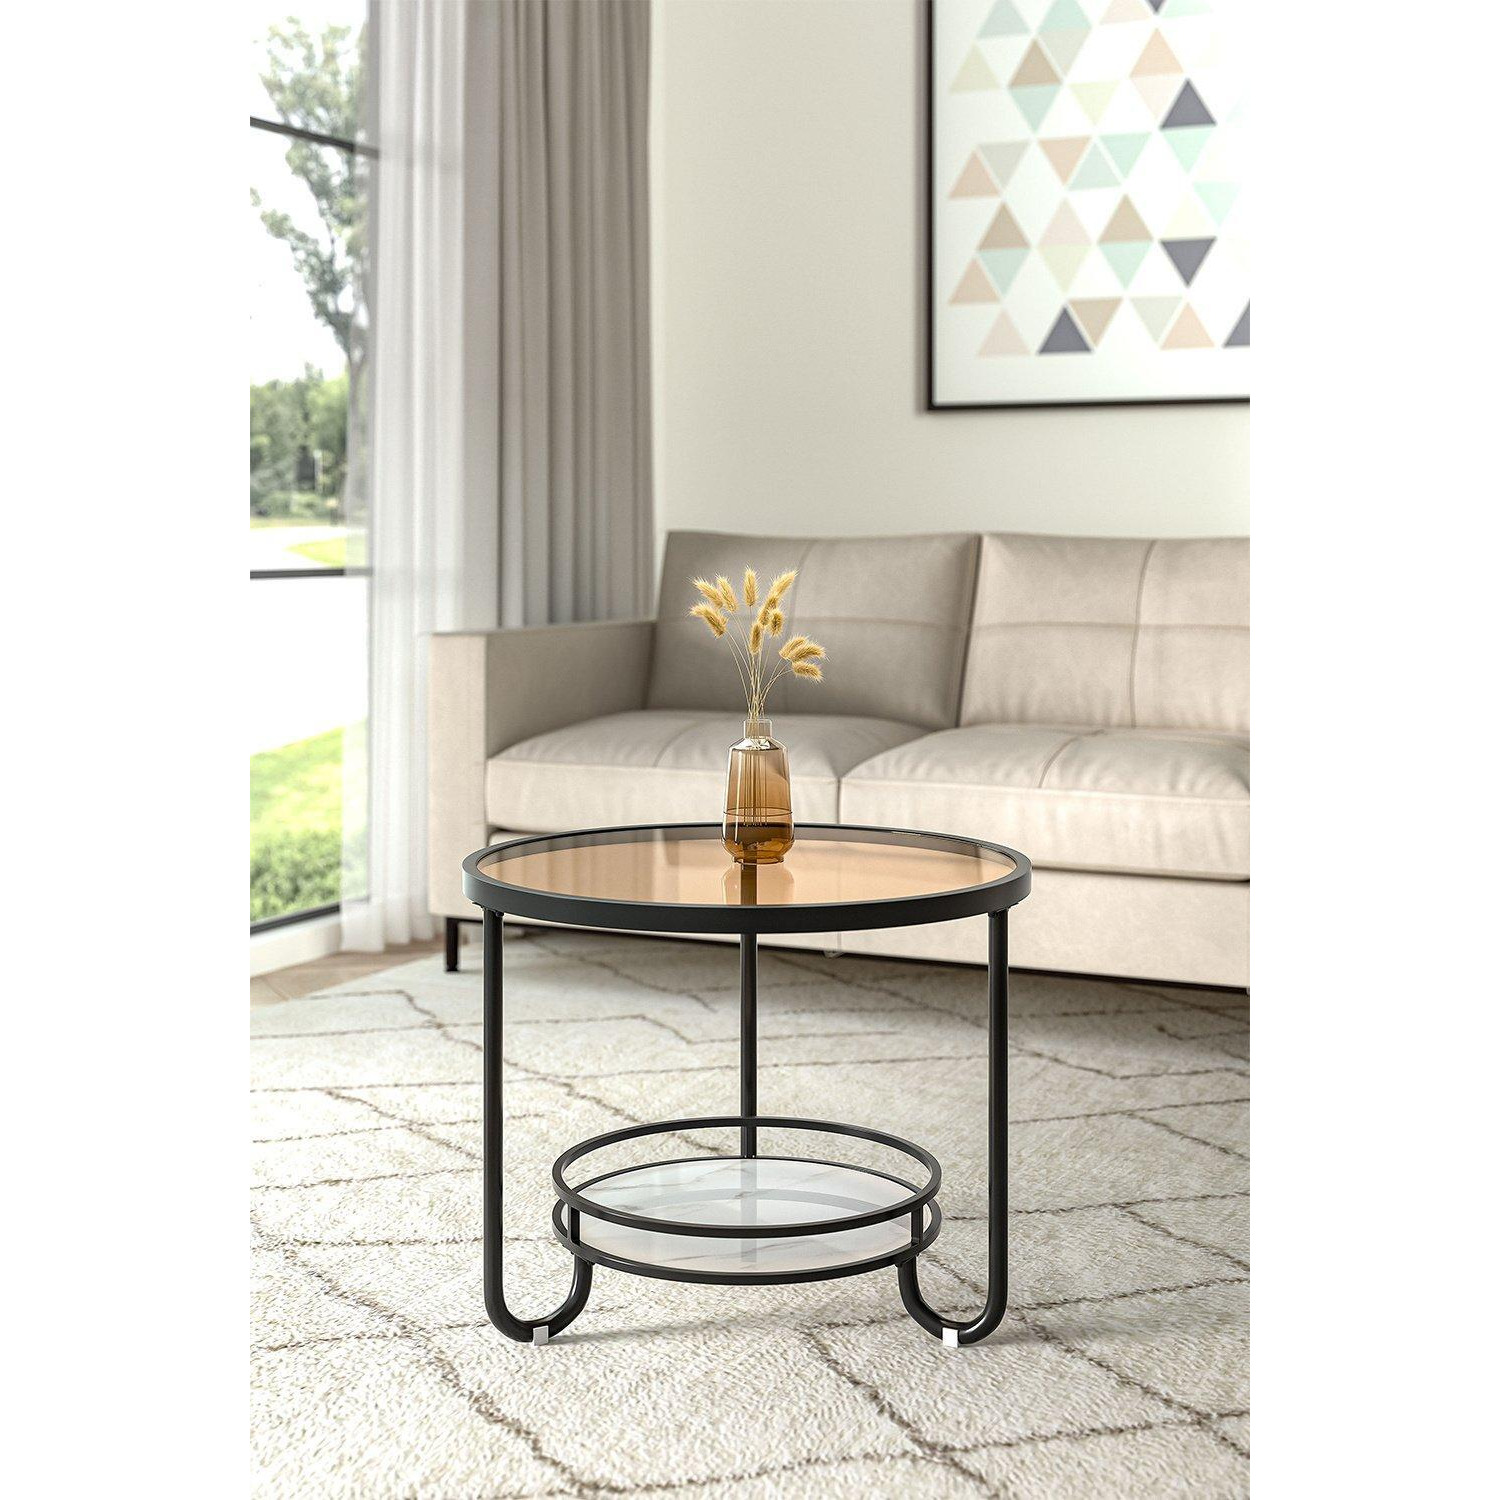 Black Round Glass and Slate Coffee Table 2 Tier - image 1